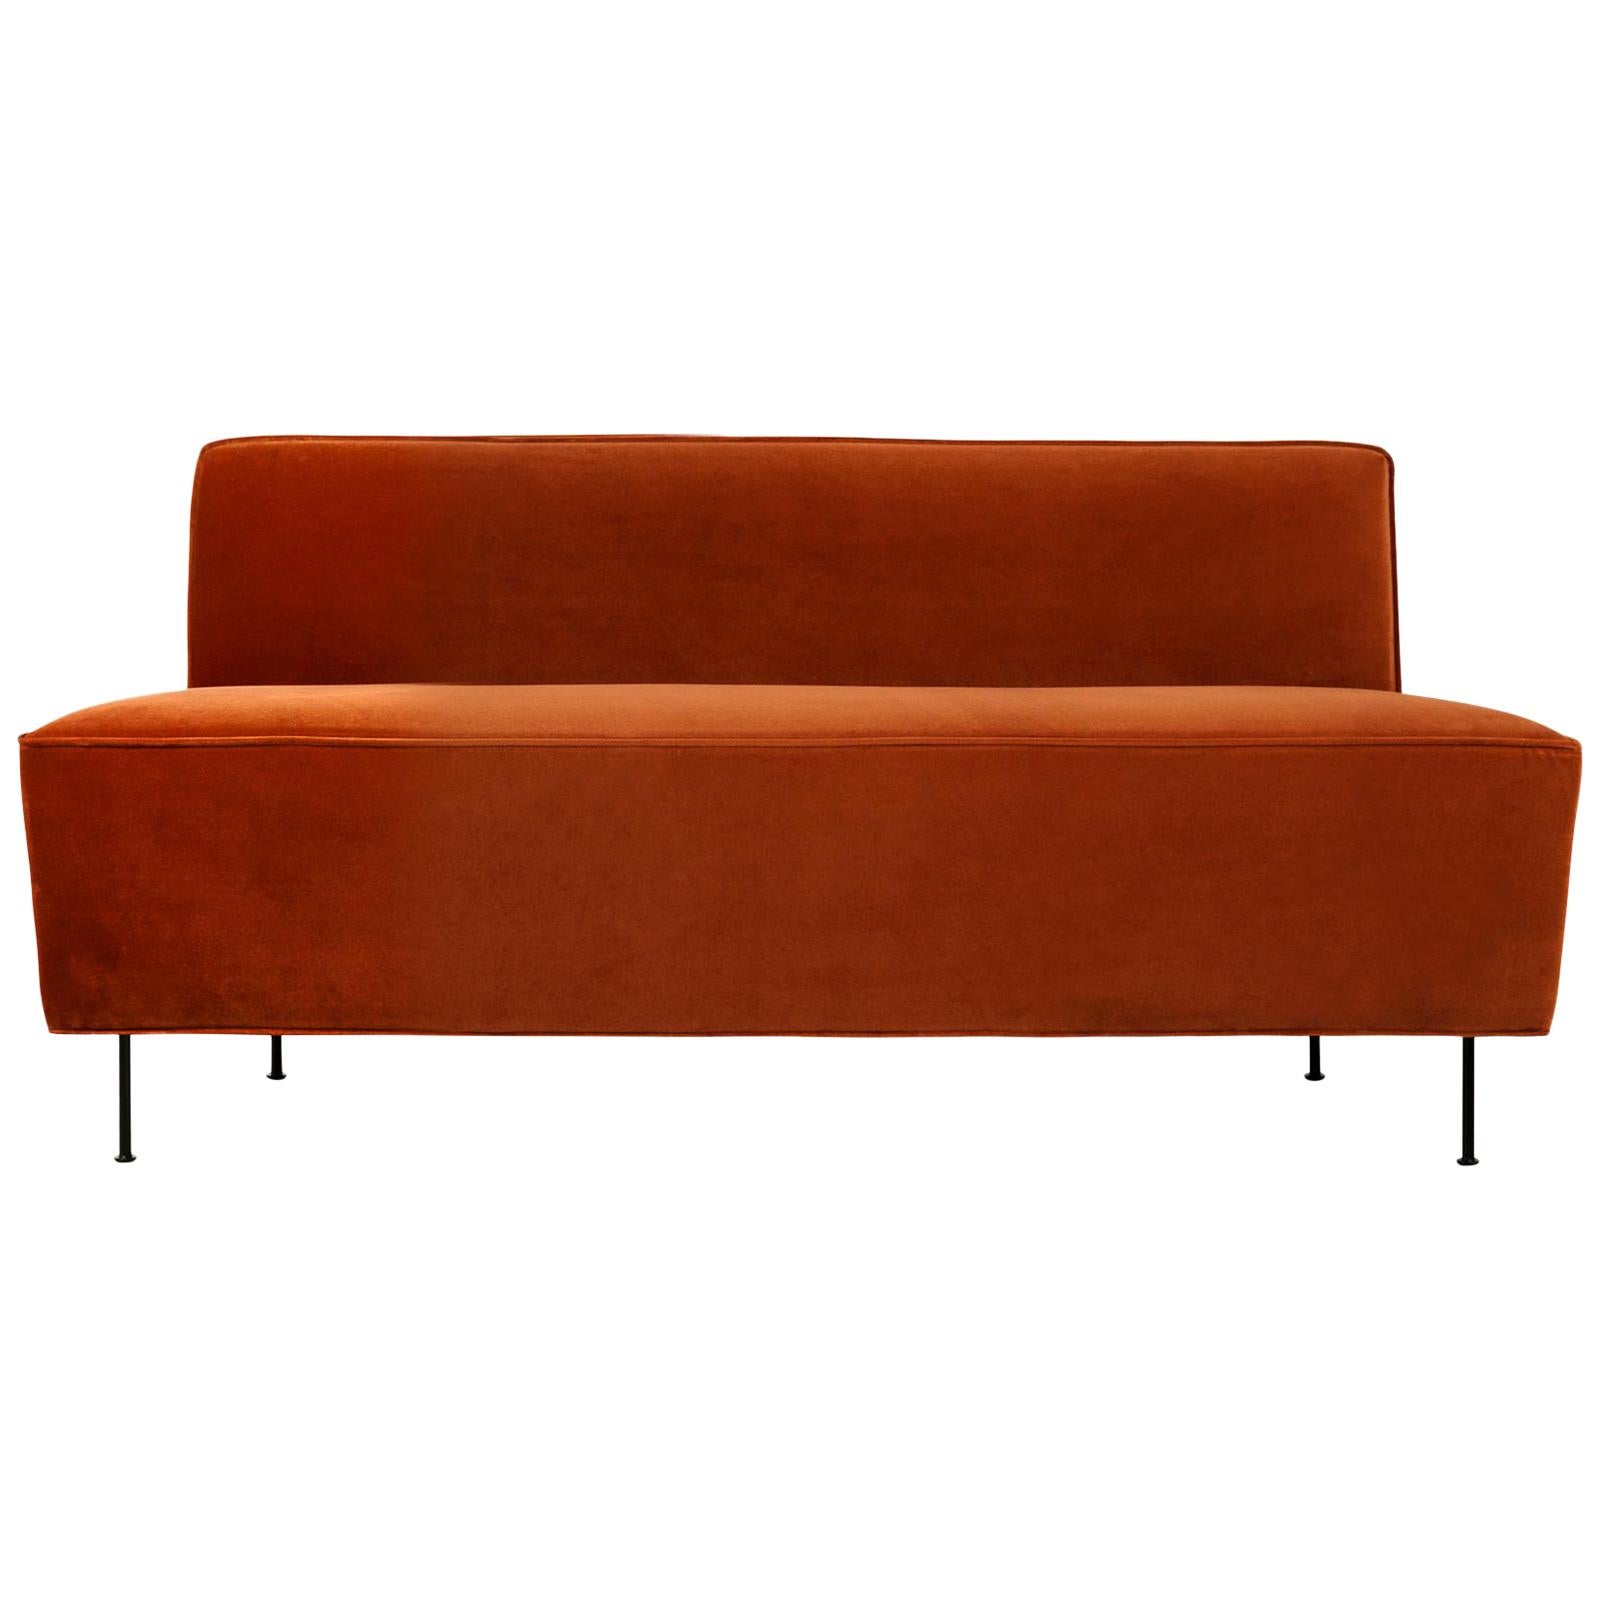 Modern Line Sofa, Dining Height, Small with Black Semi Matte Legs For Sale